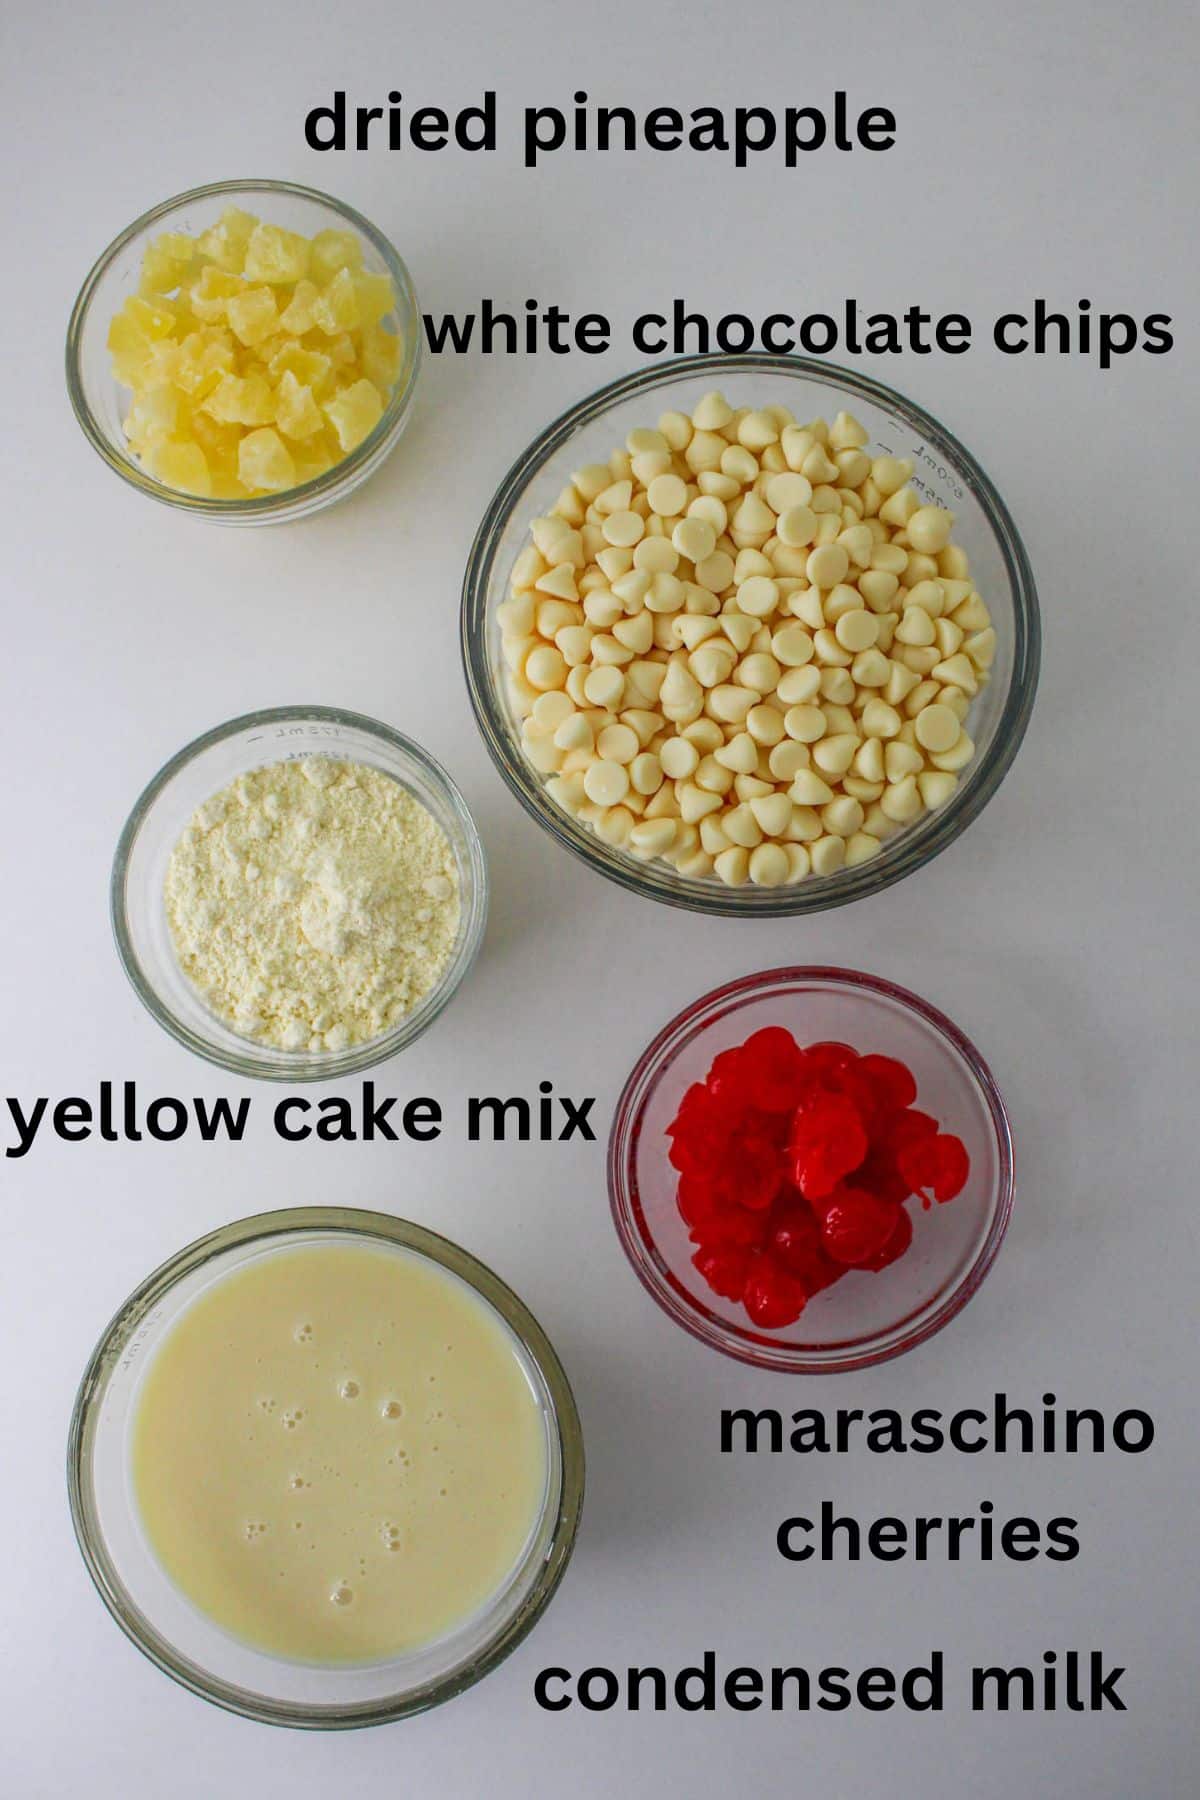 bowls of dried pineapple, white chocolate chips, yellow cake mix, maraschino cherries and condensed milk on a white background